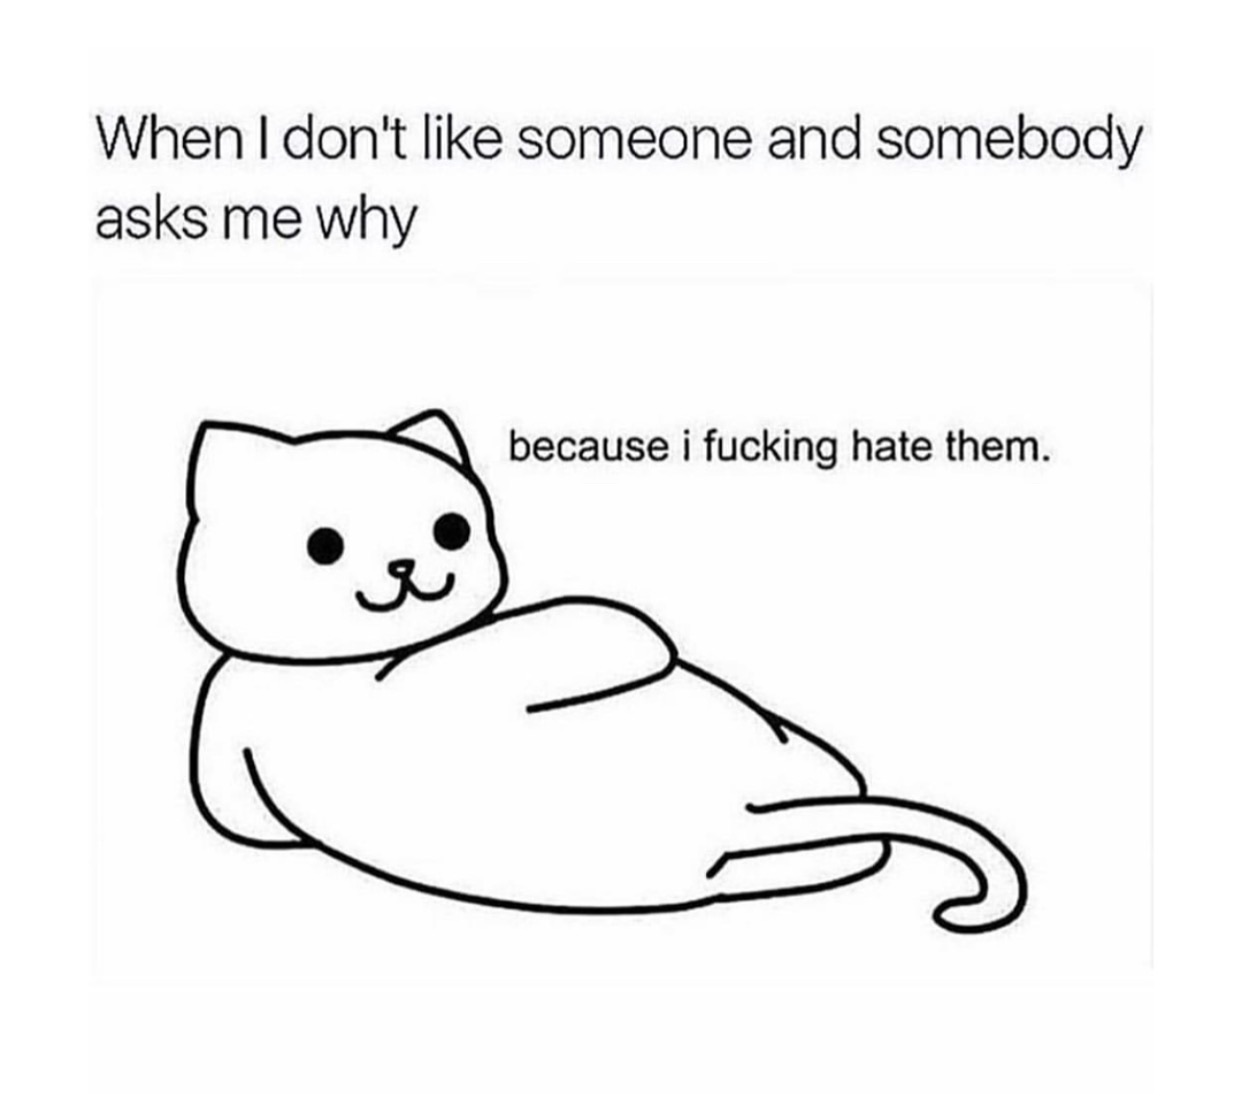 because i fucking hate them meme - When I don't someone and somebody asks me why because i fucking hate them.